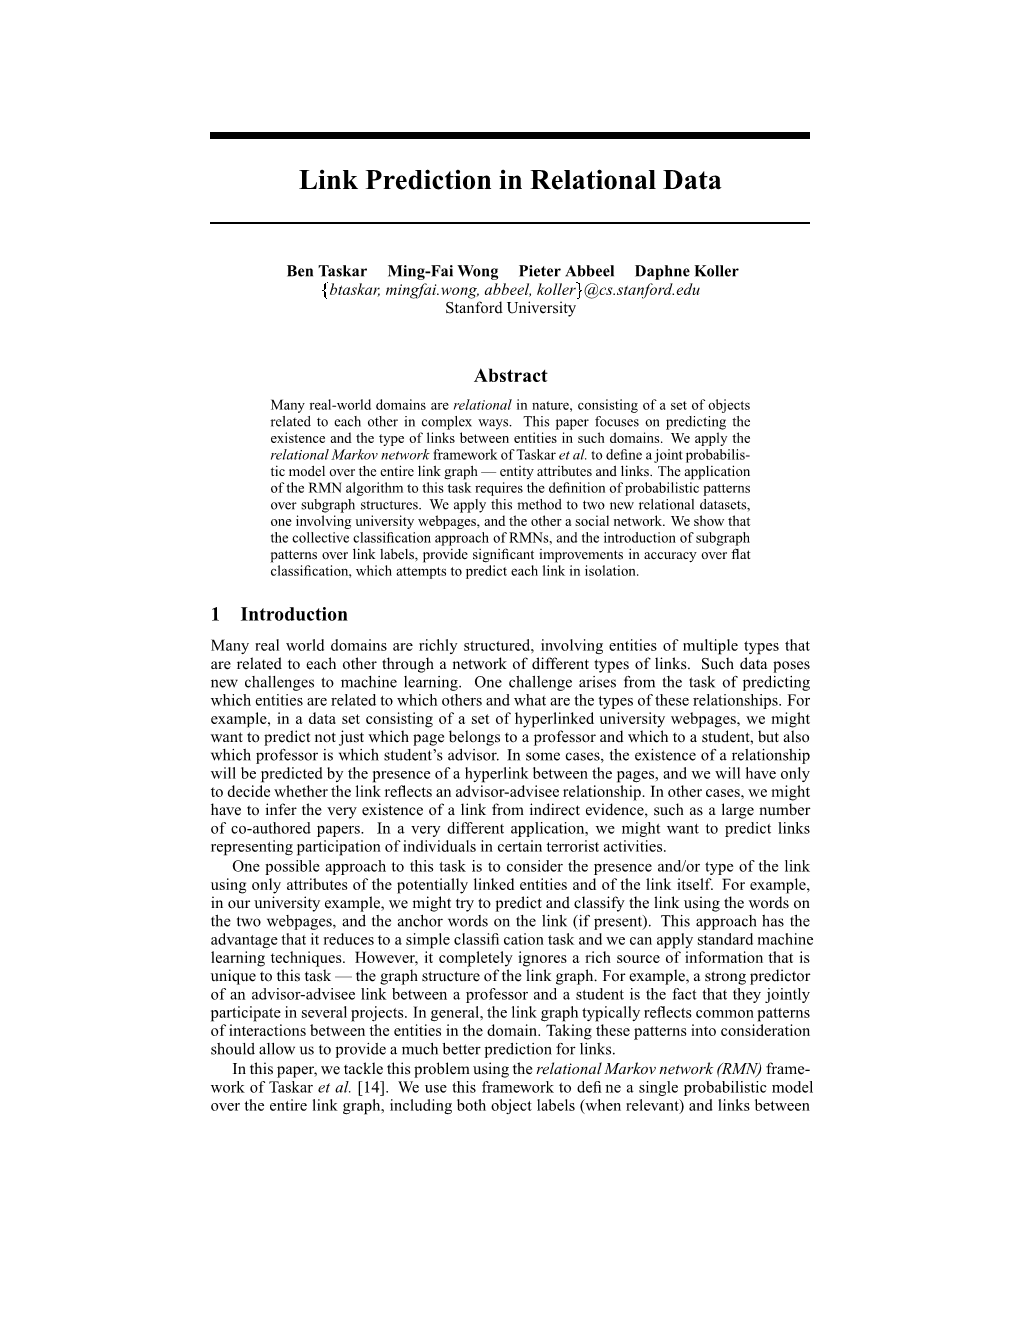 Link Prediction in Relational Data